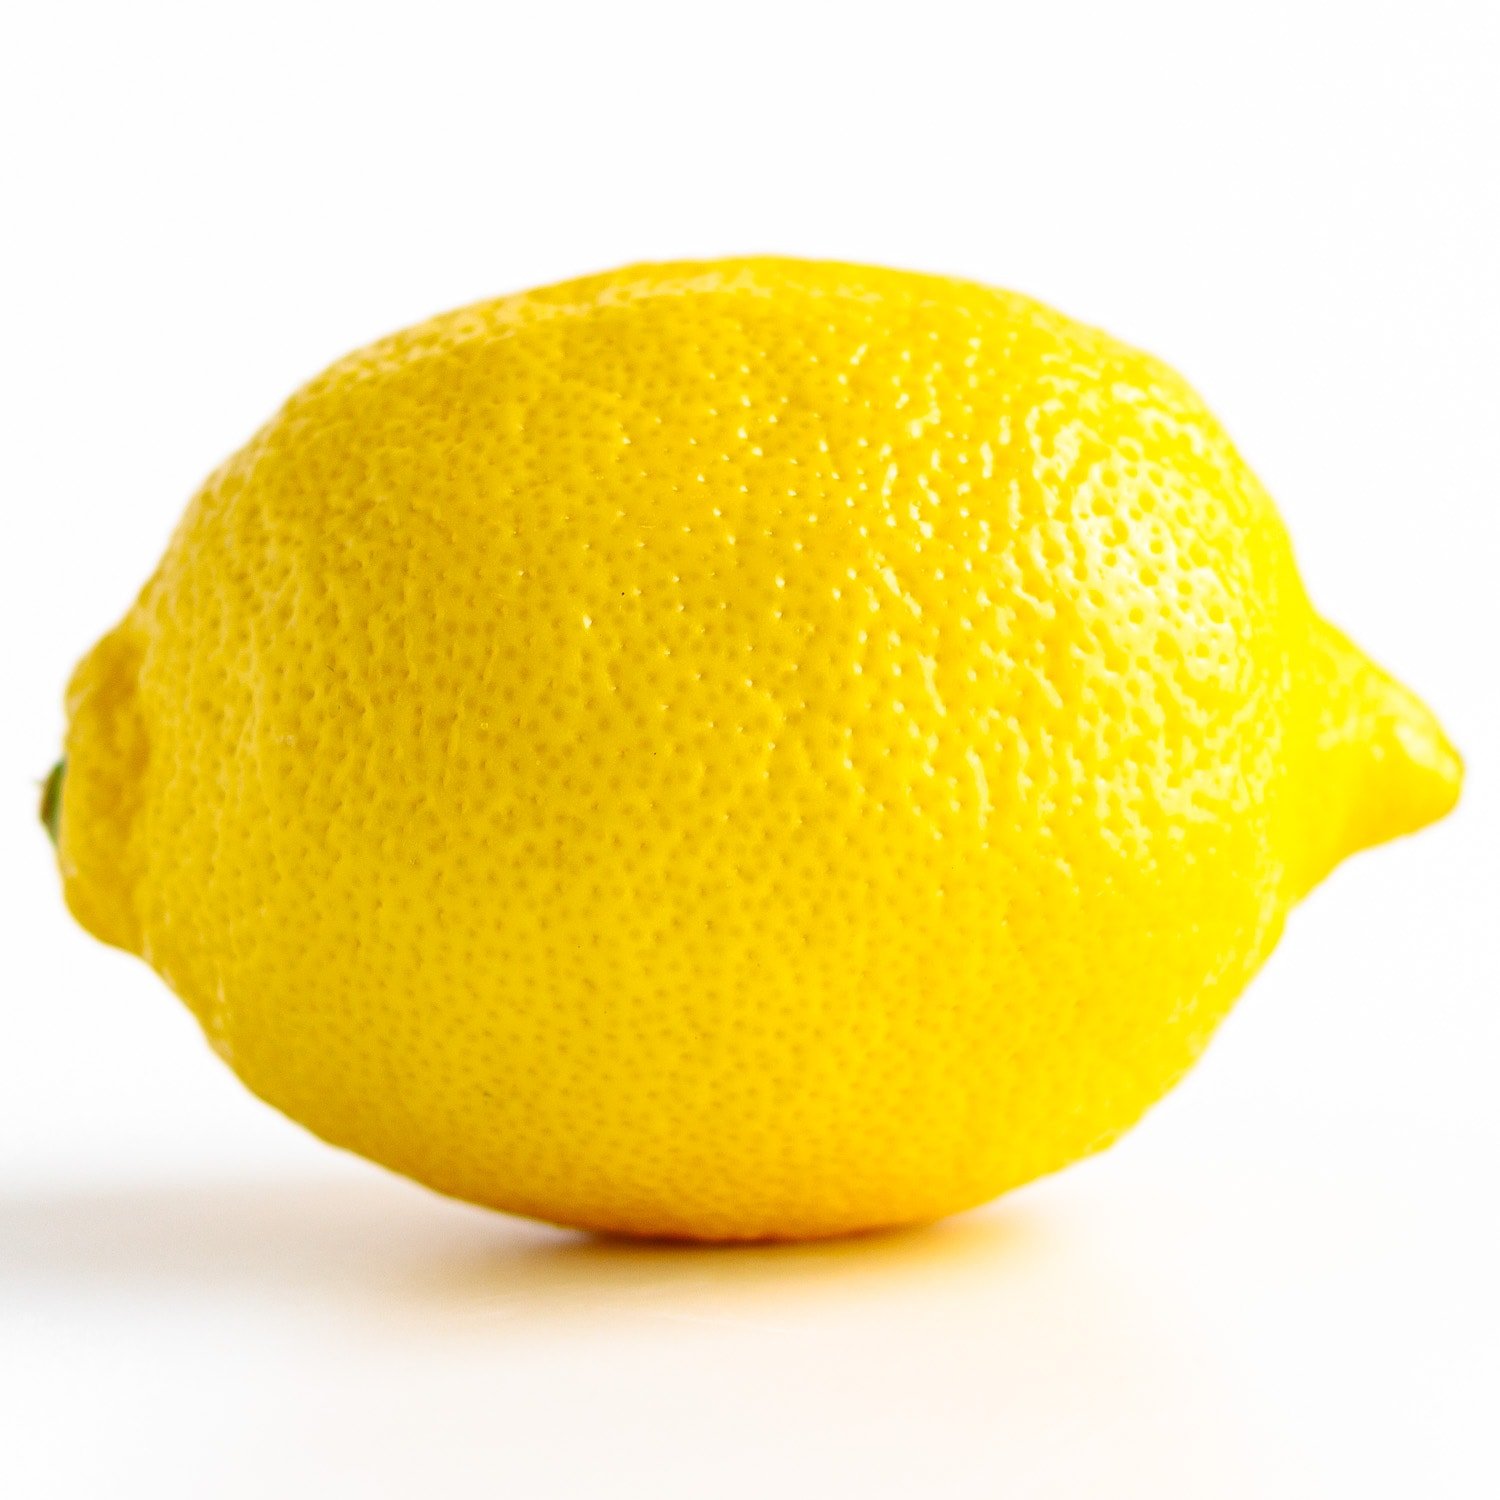 Closeup of one lemon against a white background.